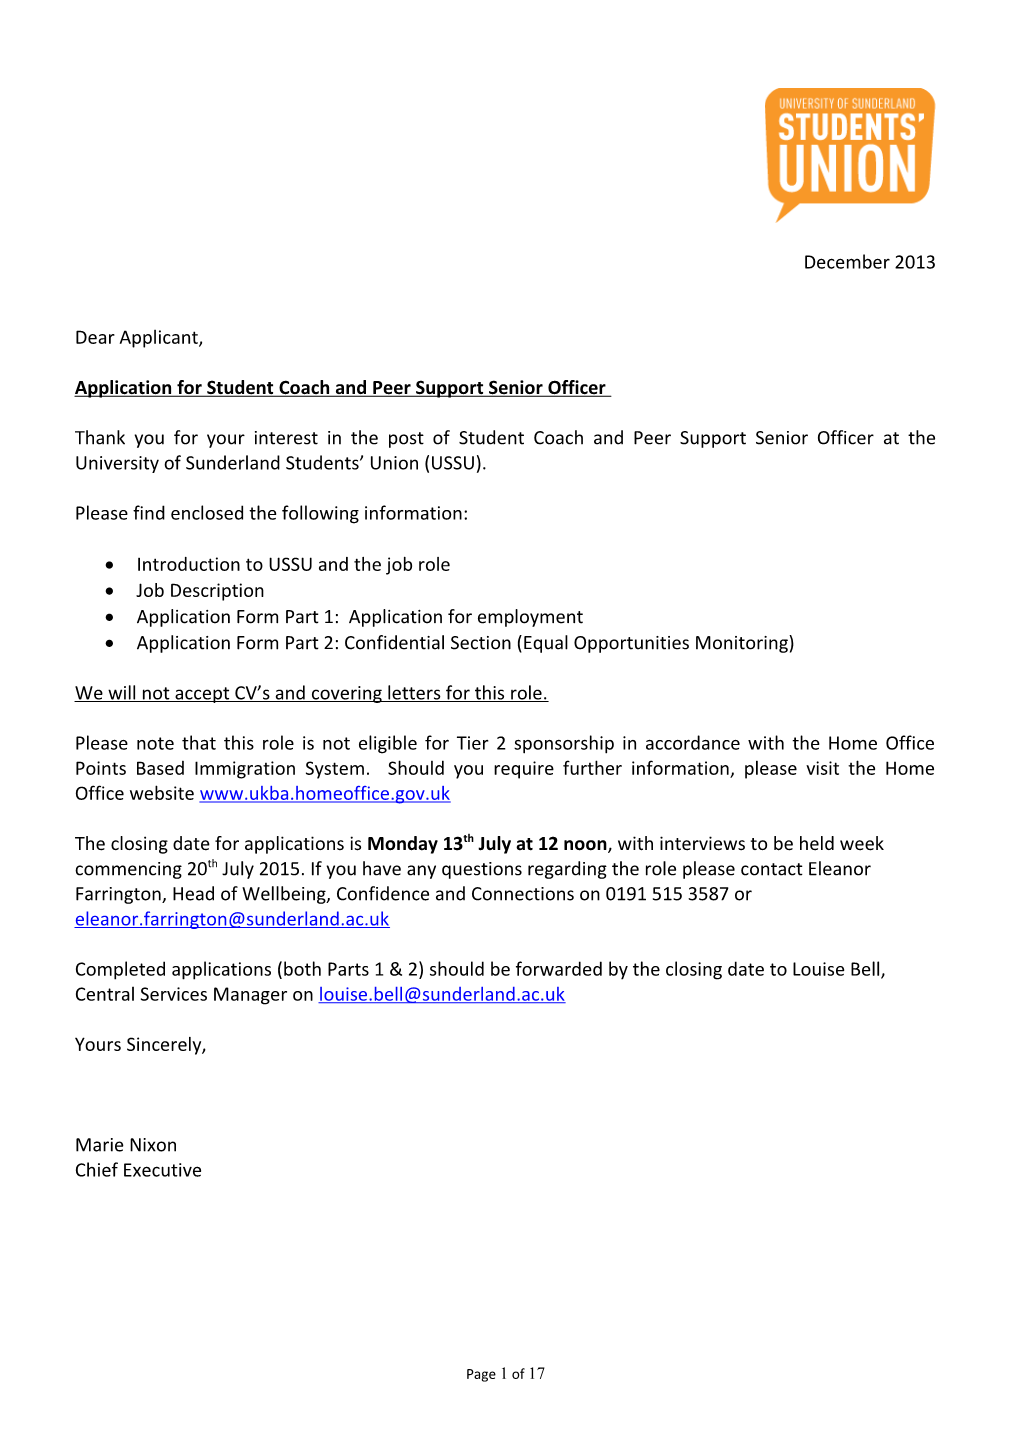 Application for Student Coach and Peer Support Senior Officer